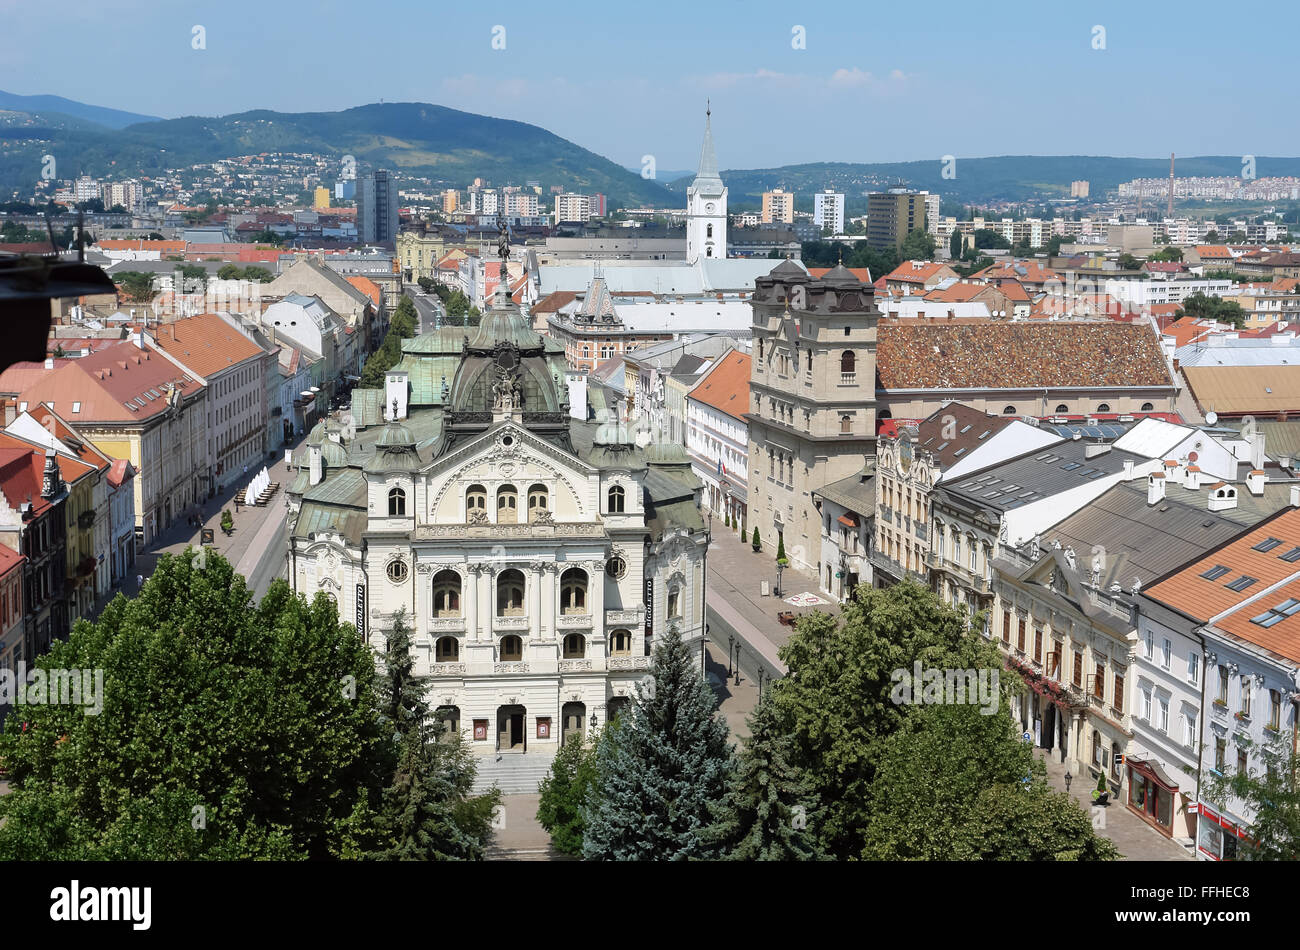 KOSICE, SLOVAKIA - AUGUST 03, 2013: Panoramic view on the central square in Kosice, Slovakia. Stock Photo